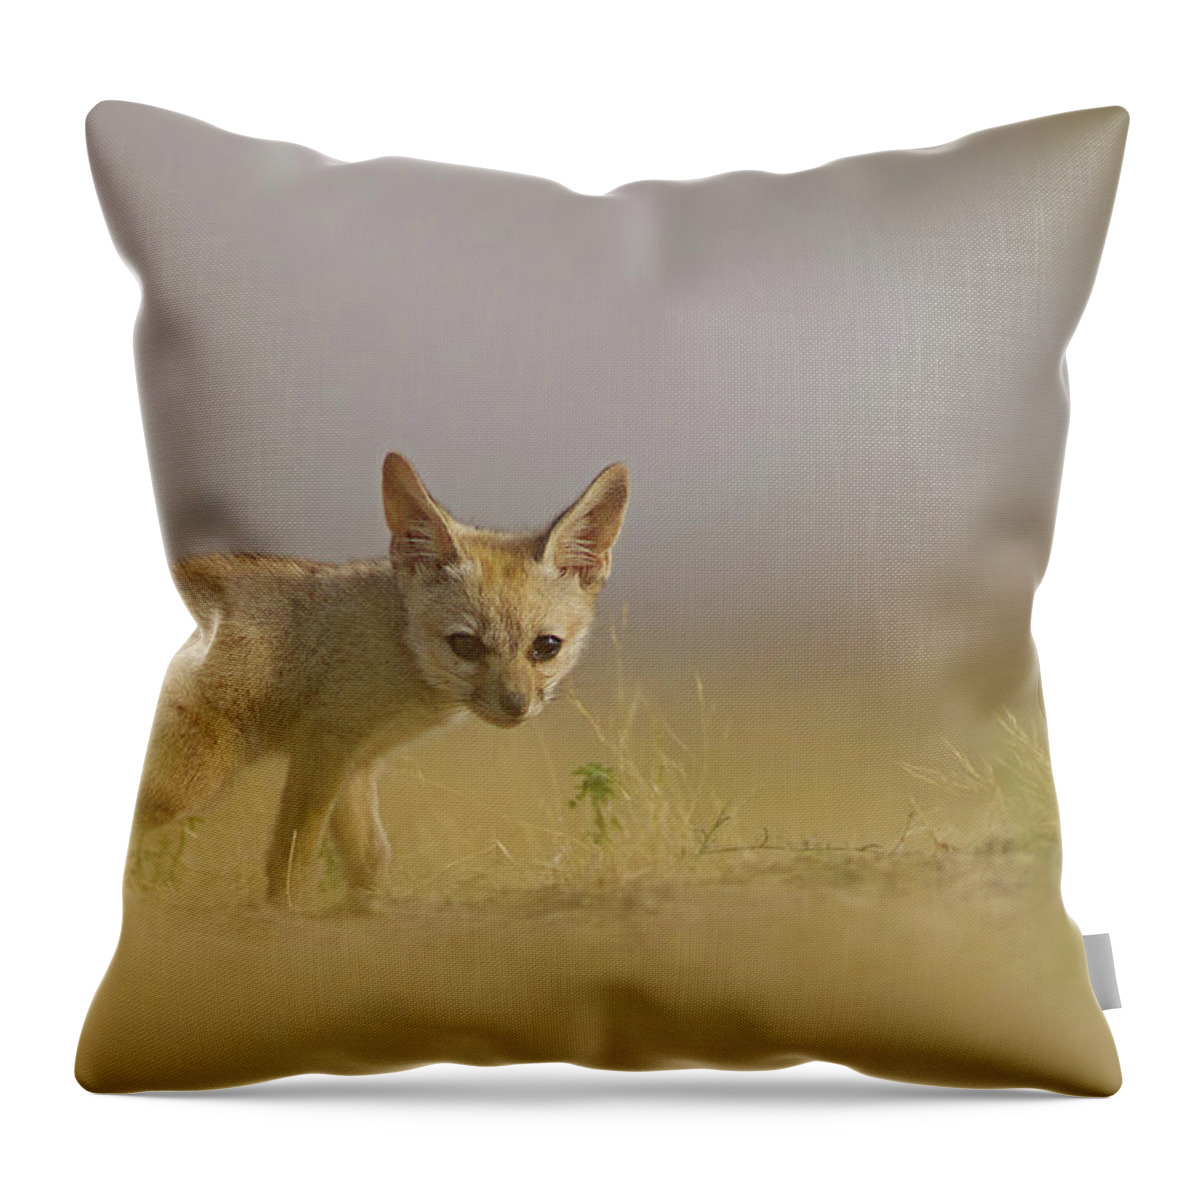 Animal Themes Throw Pillow featuring the photograph Baby Fox by Santanu Nandy